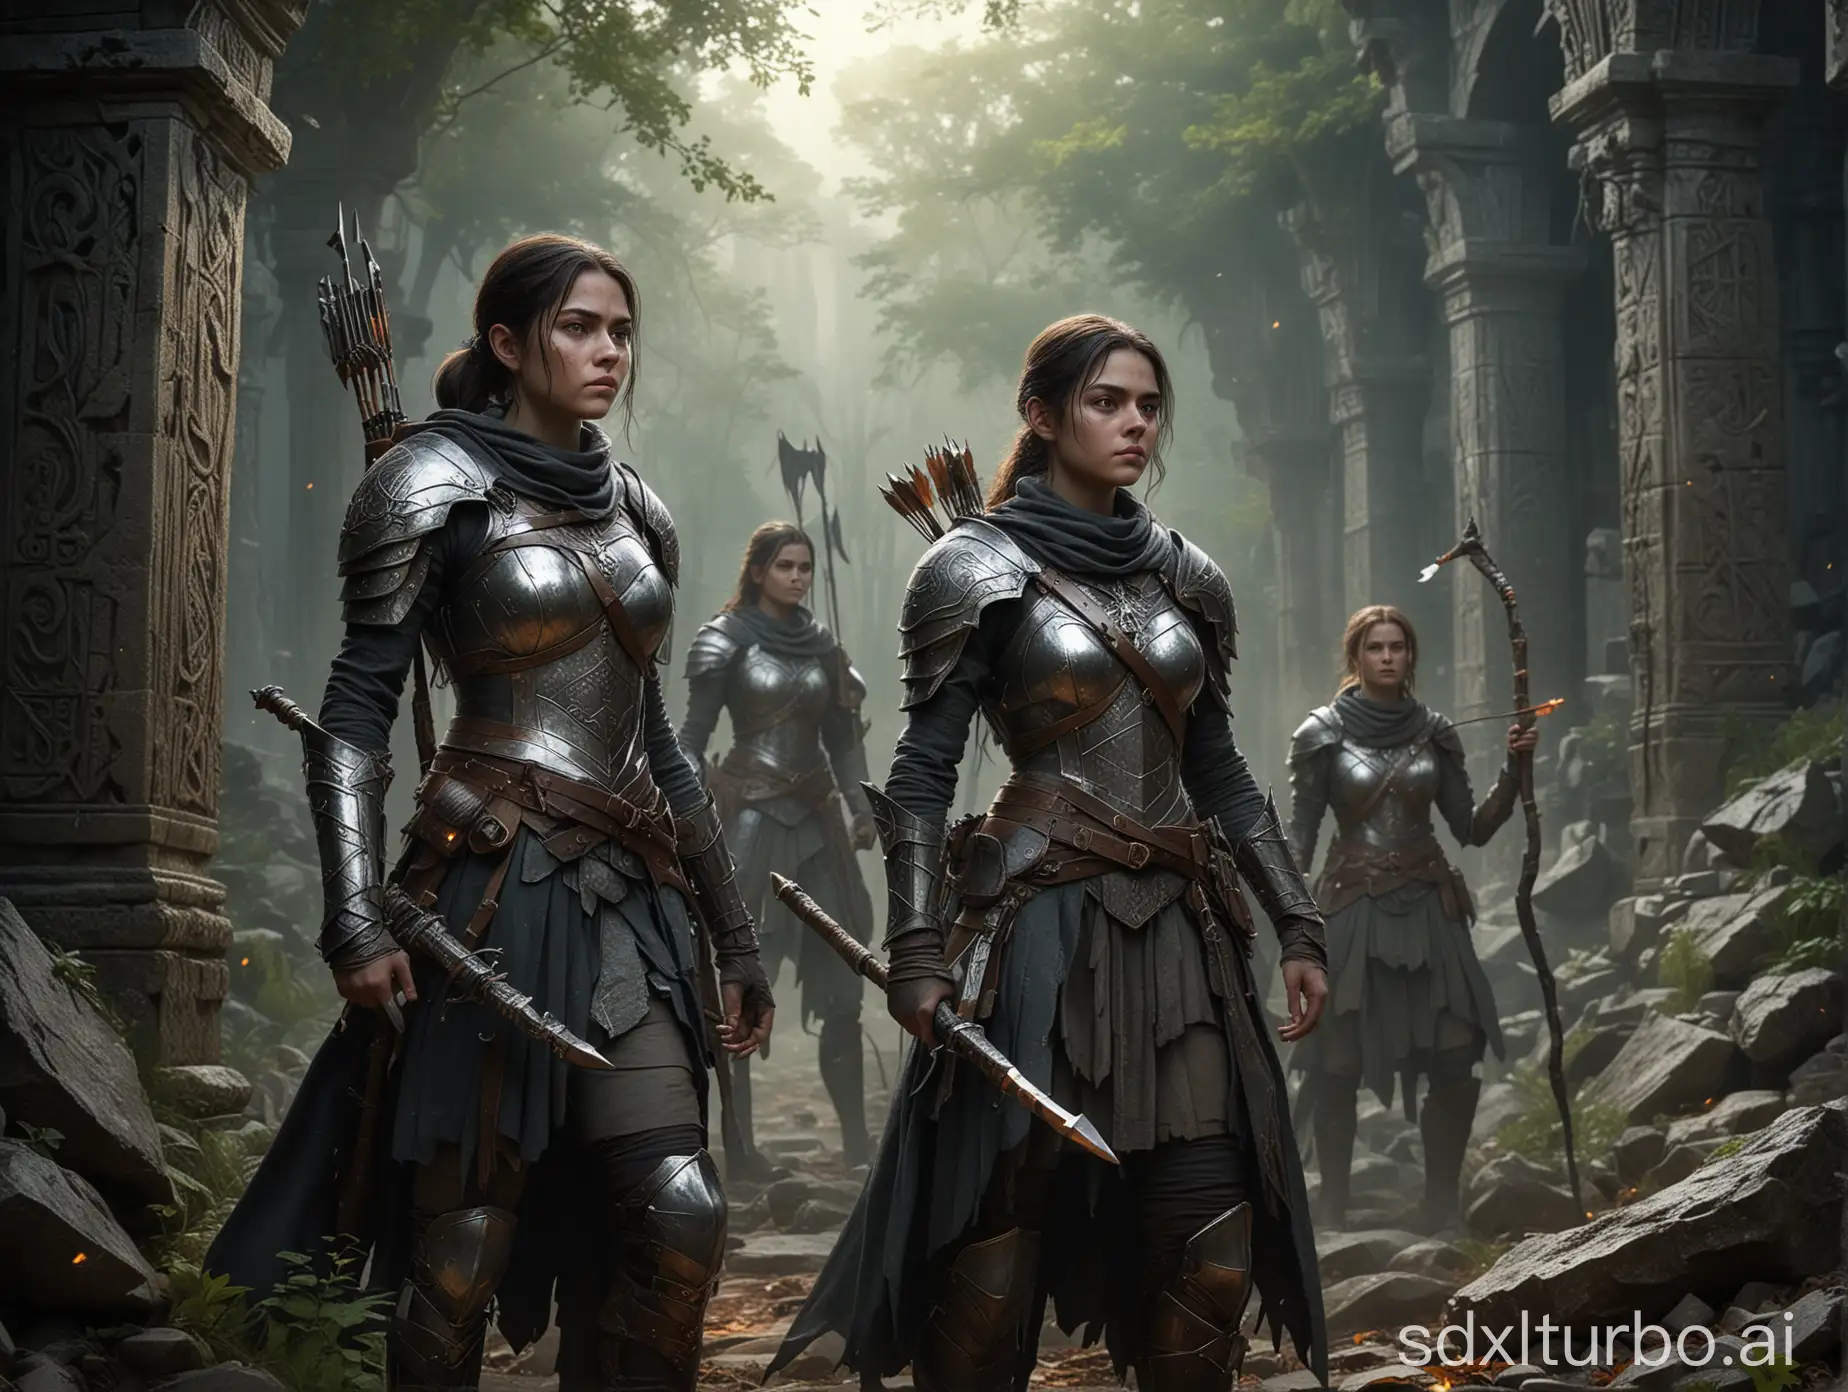 Arya, a nimble warrior woman, and her three companions—a knight clad in gleaming silver armor, a witch with a staff adorned with precious gems, and a ranger equipped with an exquisitely carved longbow—are exploring the ruins of a forgotten ancient temple. Their gazes are resolute, ready to confront the dark forces of Selen. Please create a dynamic painting that showcases their courage and team spirit. Details required include: the knight's silver armor engraved with runes that repel darkness, the witch's staff topped with a gem that shimmers with a mysterious light, the ranger's longbow carved with totems representing the guardian of the forest, the temple's stone walls covered with intricate symbols hinting at ancient power, and their determined expressions as they prepare for the impending battle. 